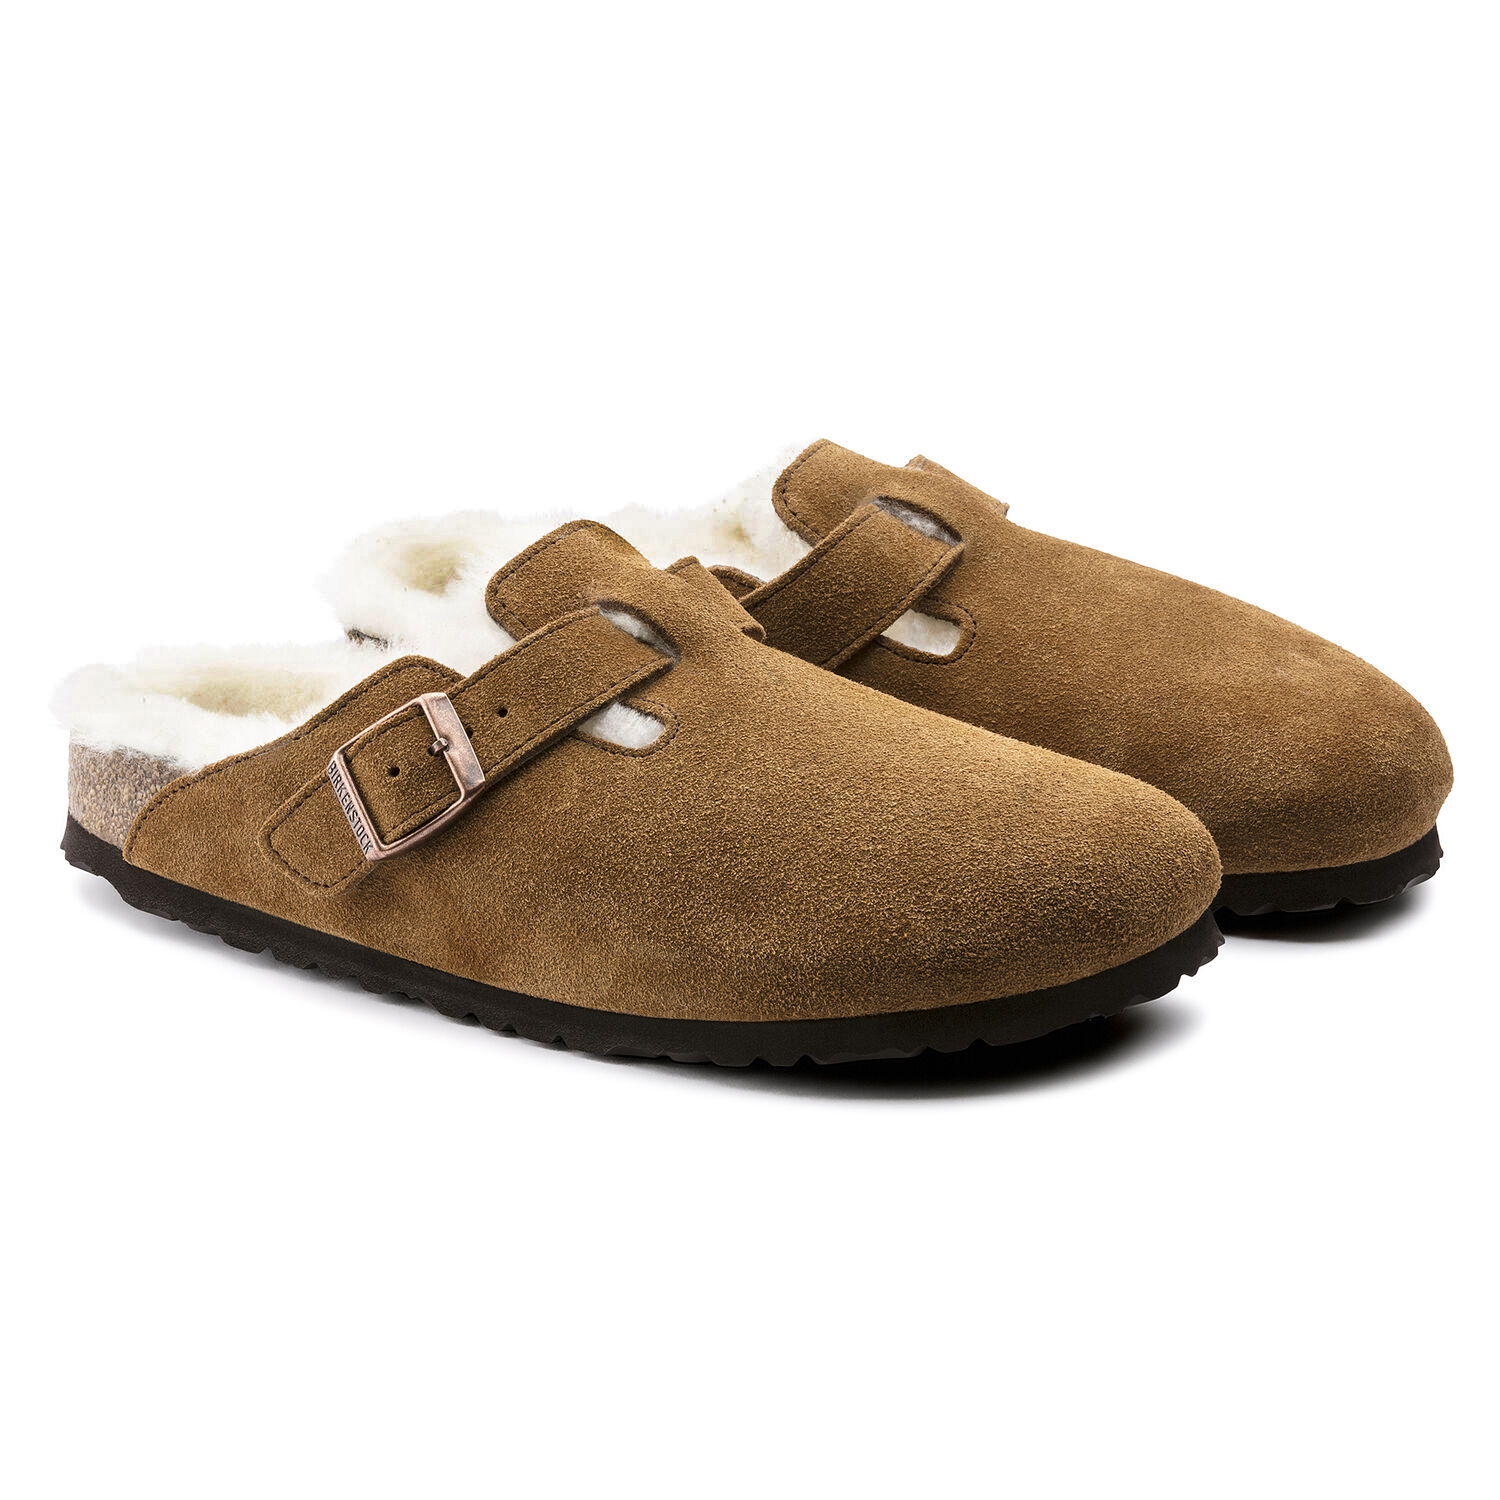 Faux Fur Clogs And Cozy Shearling Slipper Shoes 2020